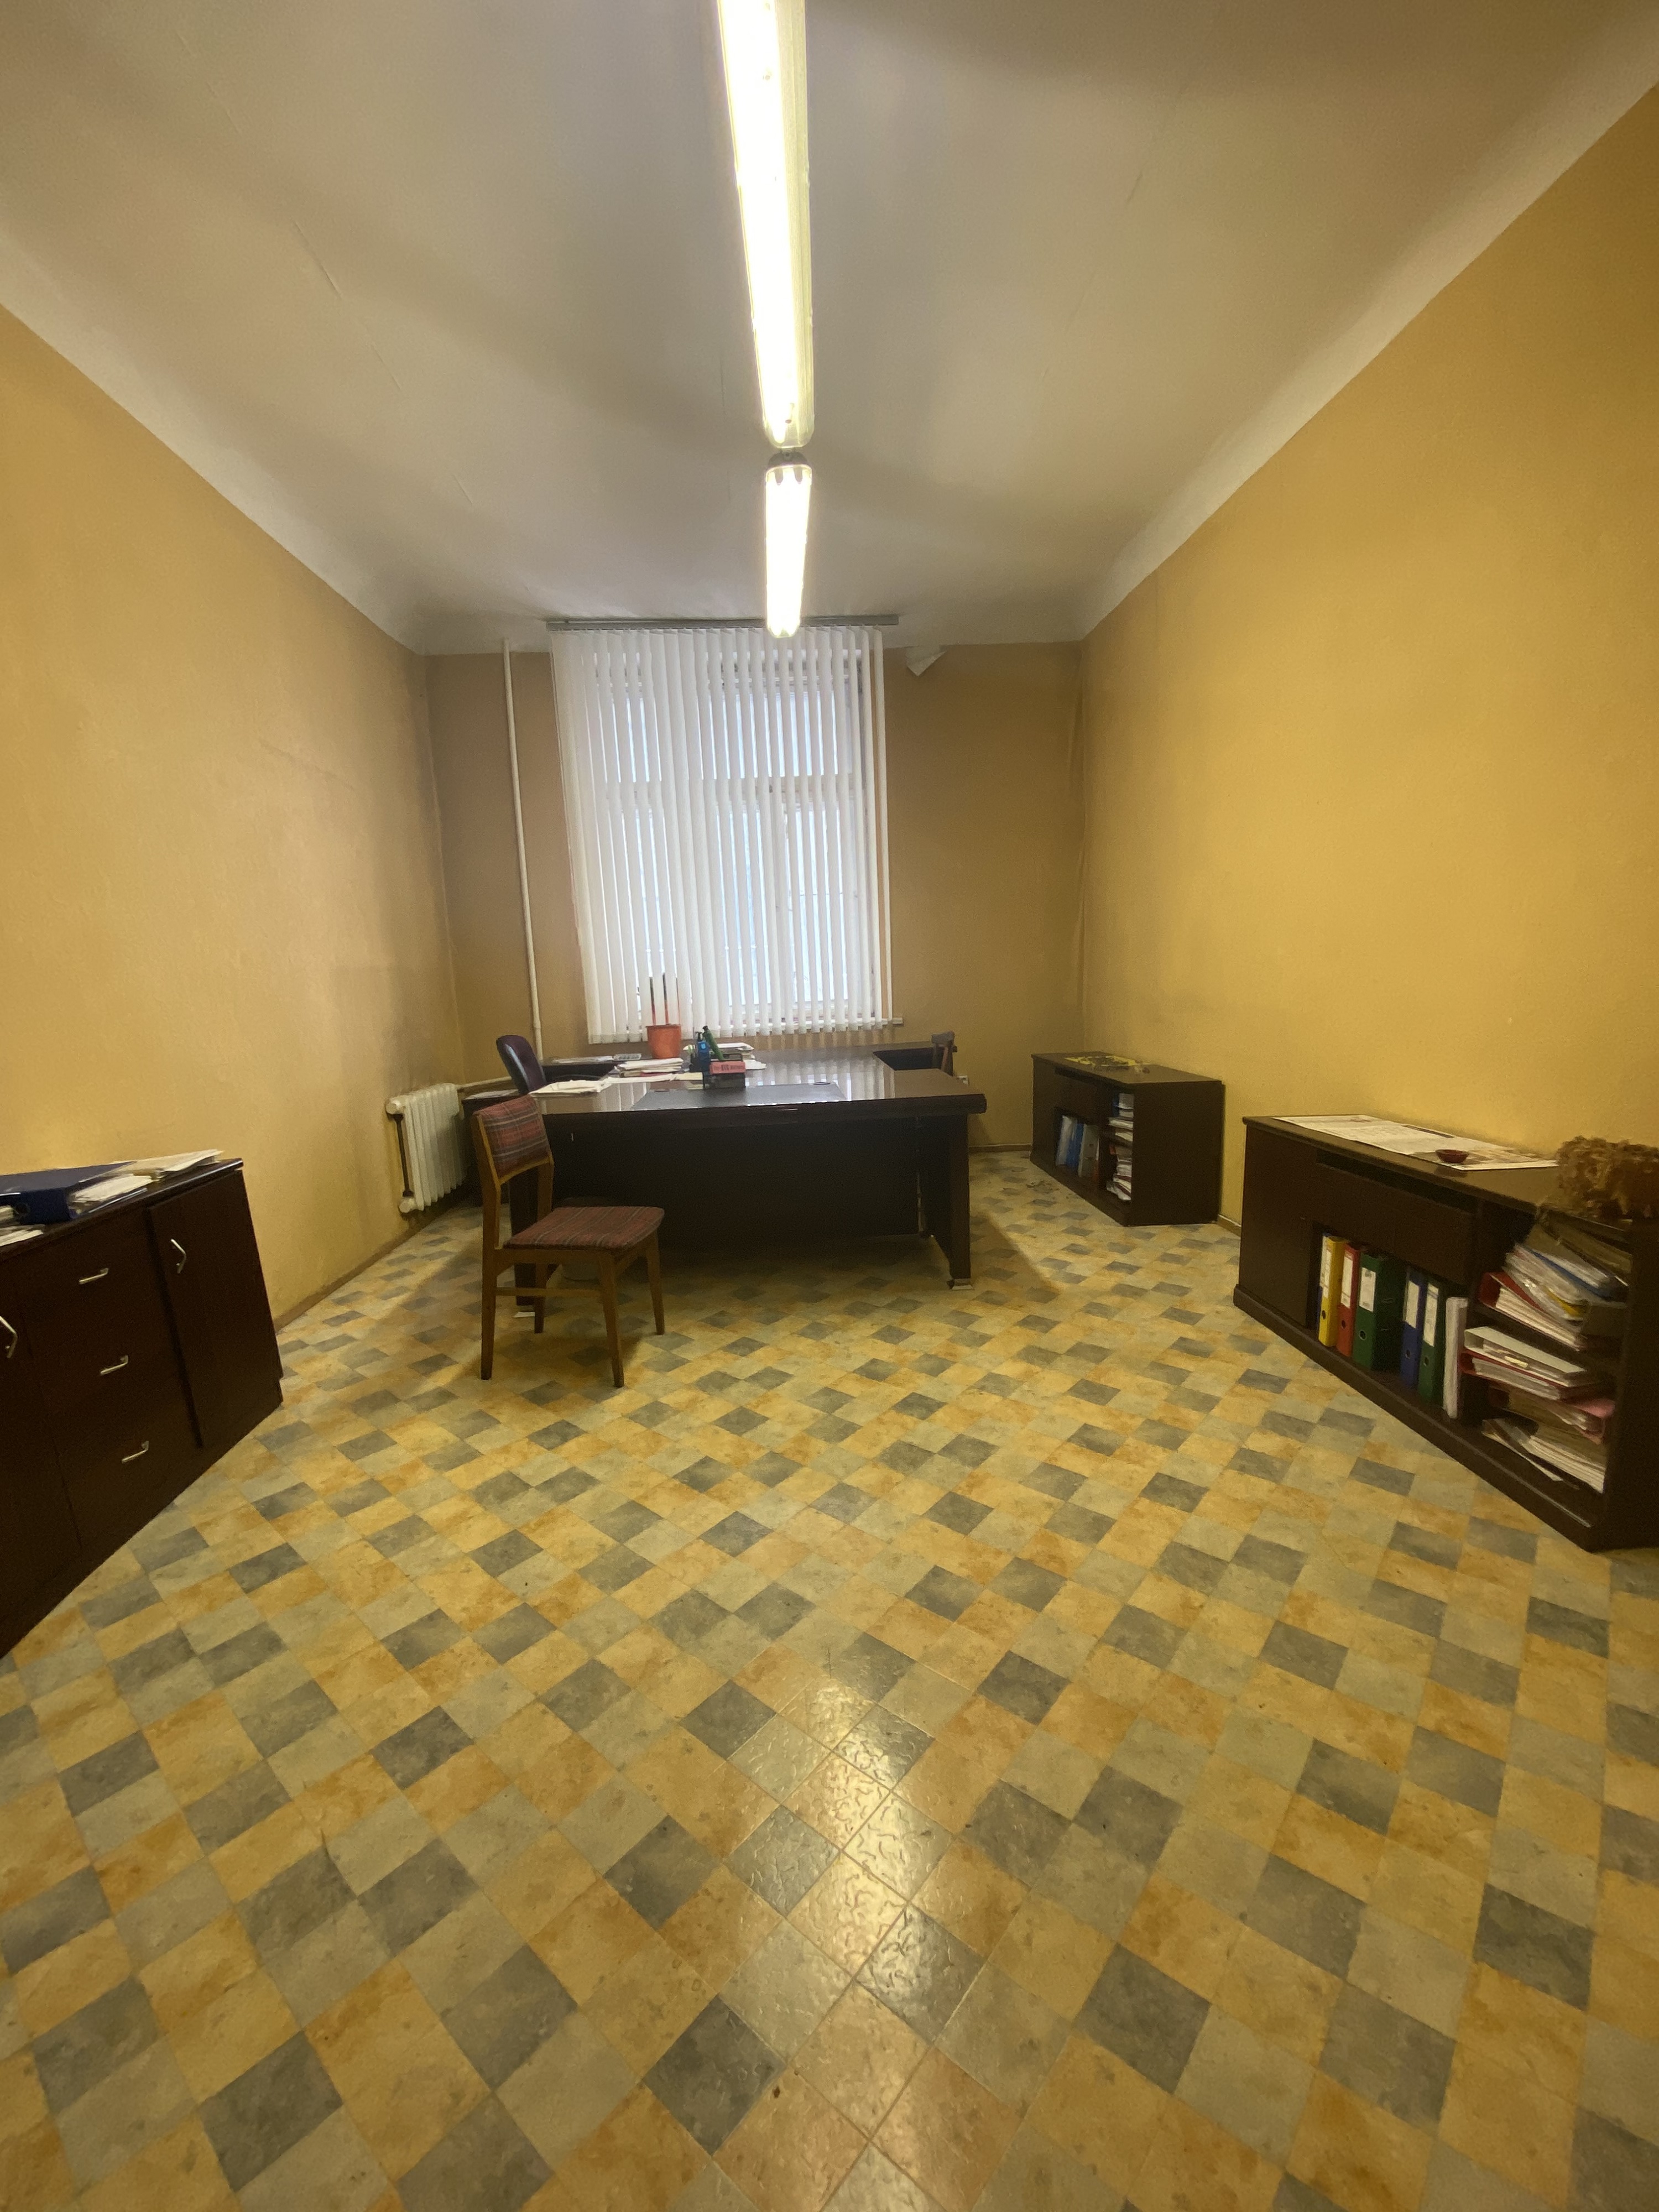 Apartment for sale, Stabu street 61 - Image 1